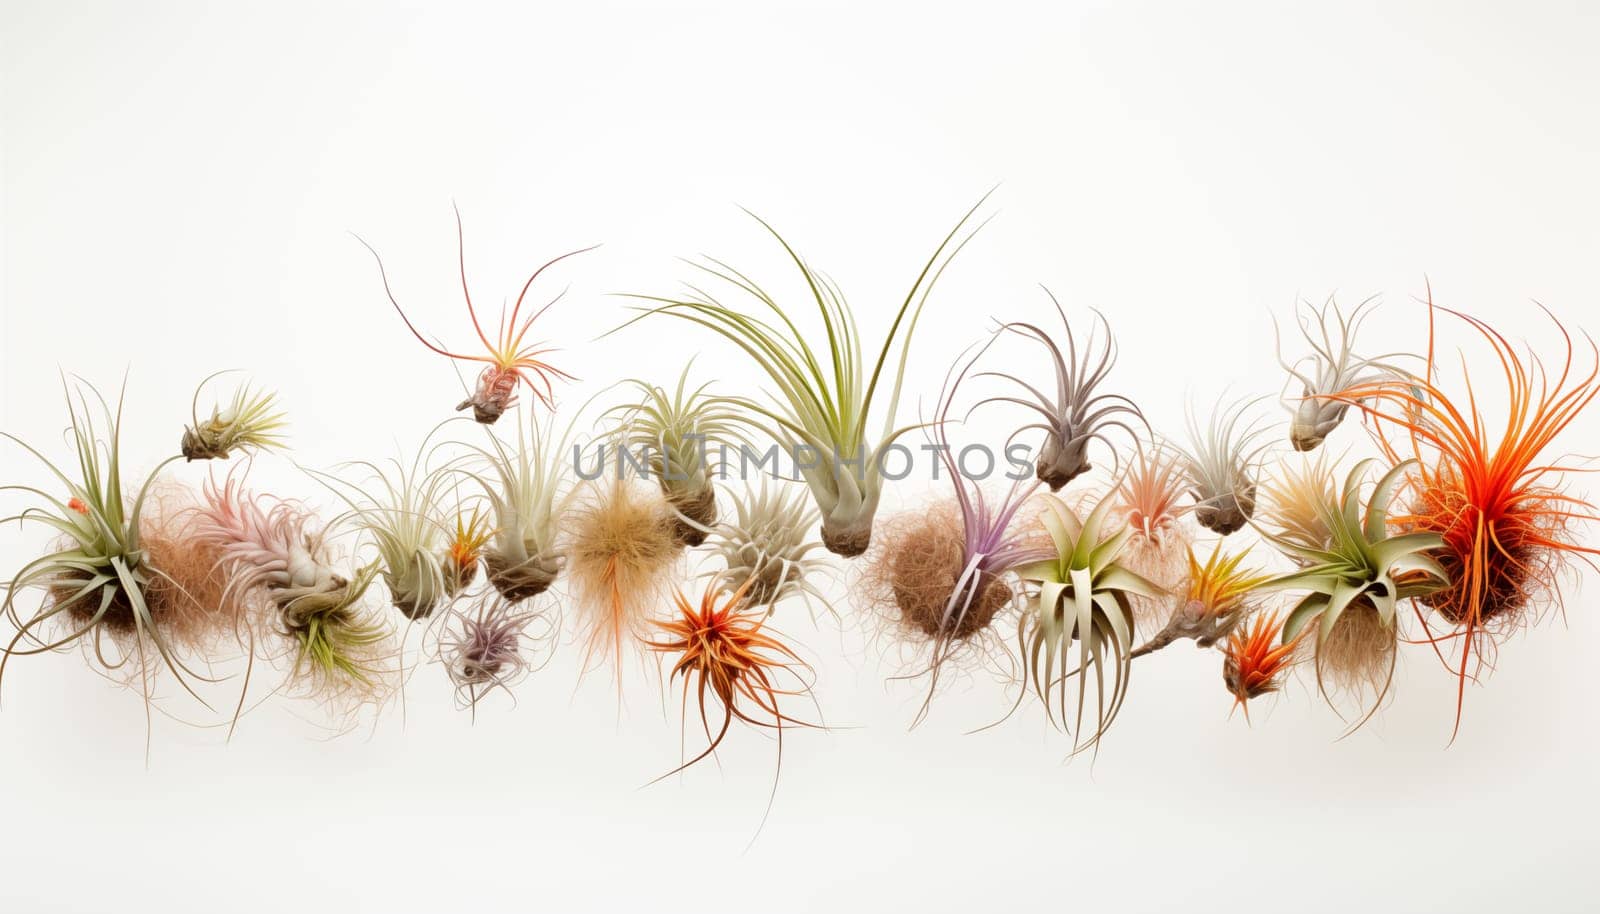 artistic arrangement of various air plants by Nadtochiy